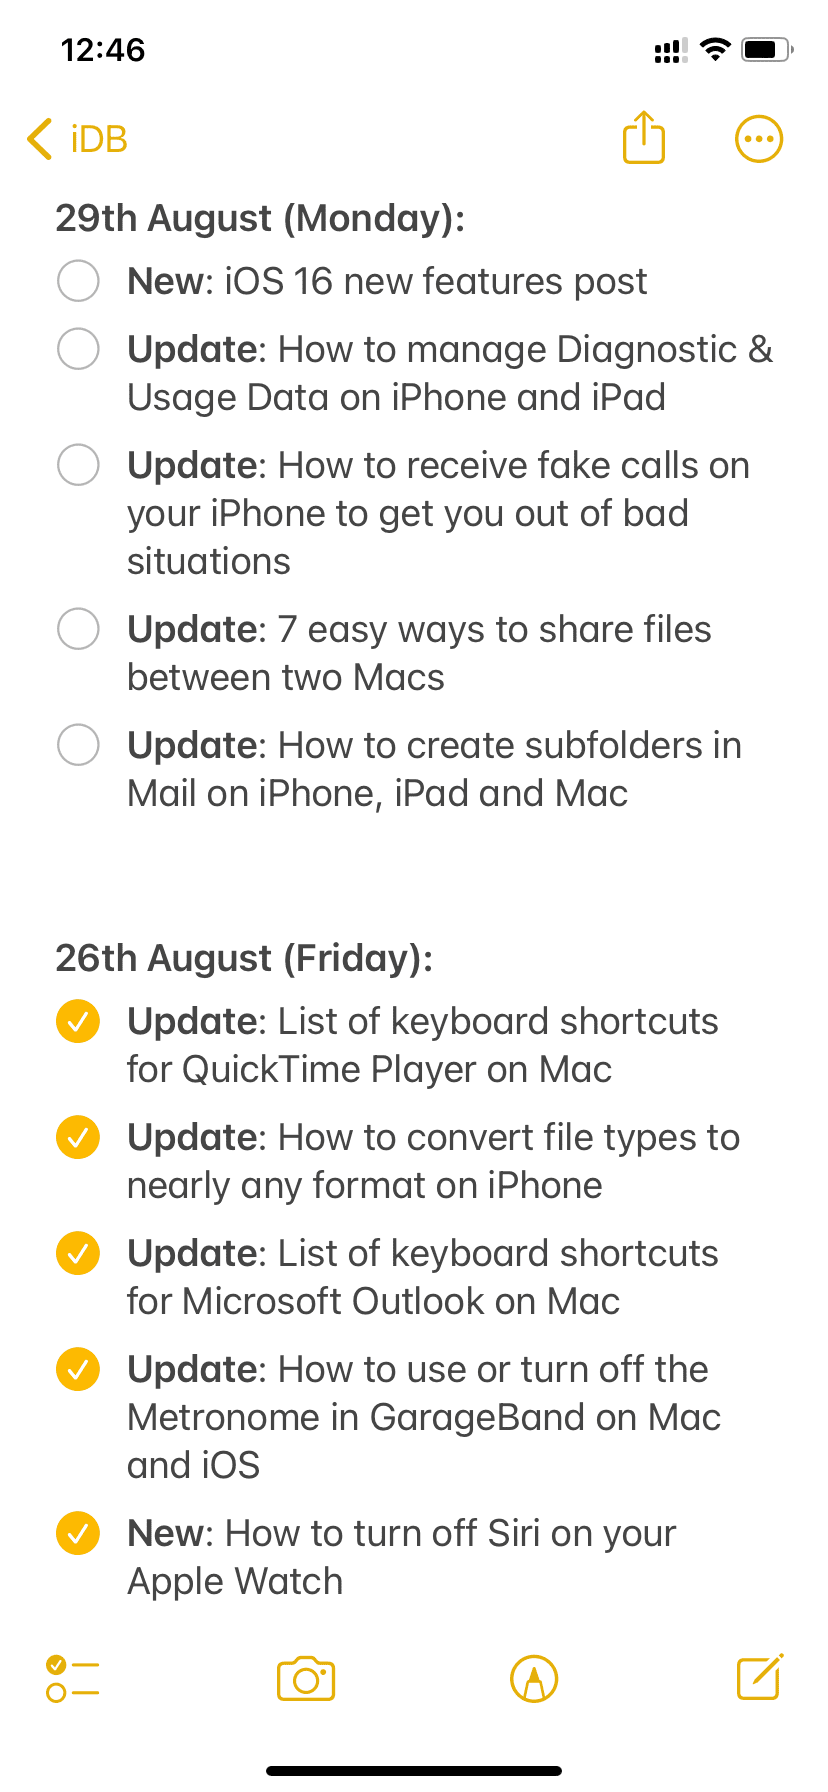 To-do list in iPhone Notes app